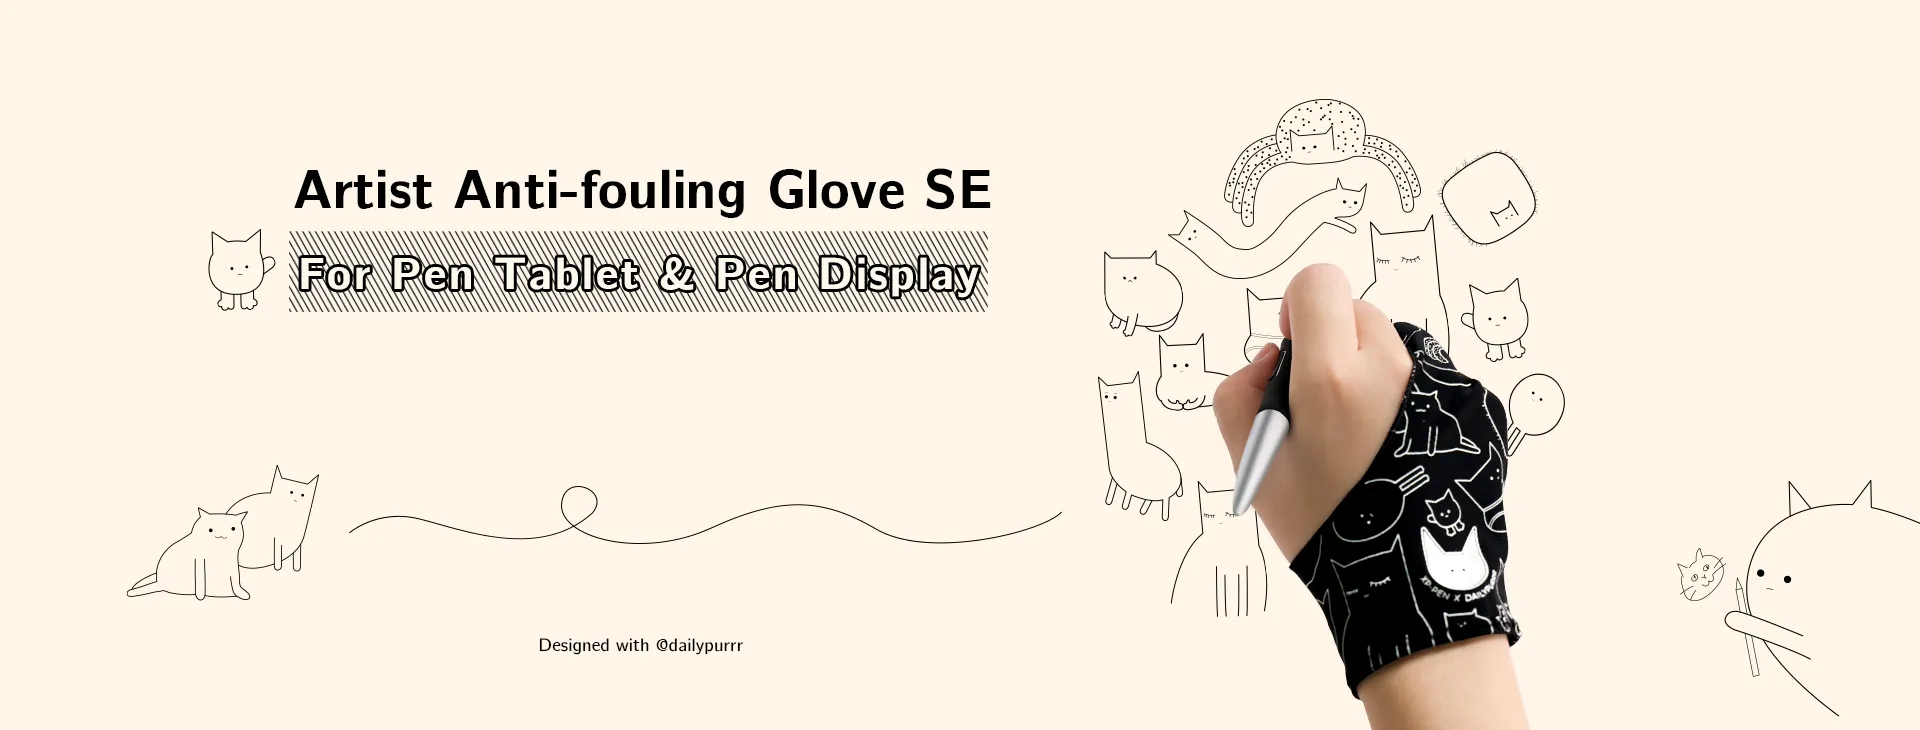 Anti-Fouling Two-fingers Artist Anti-touch Glove Drawing for Ipad Screen  Board